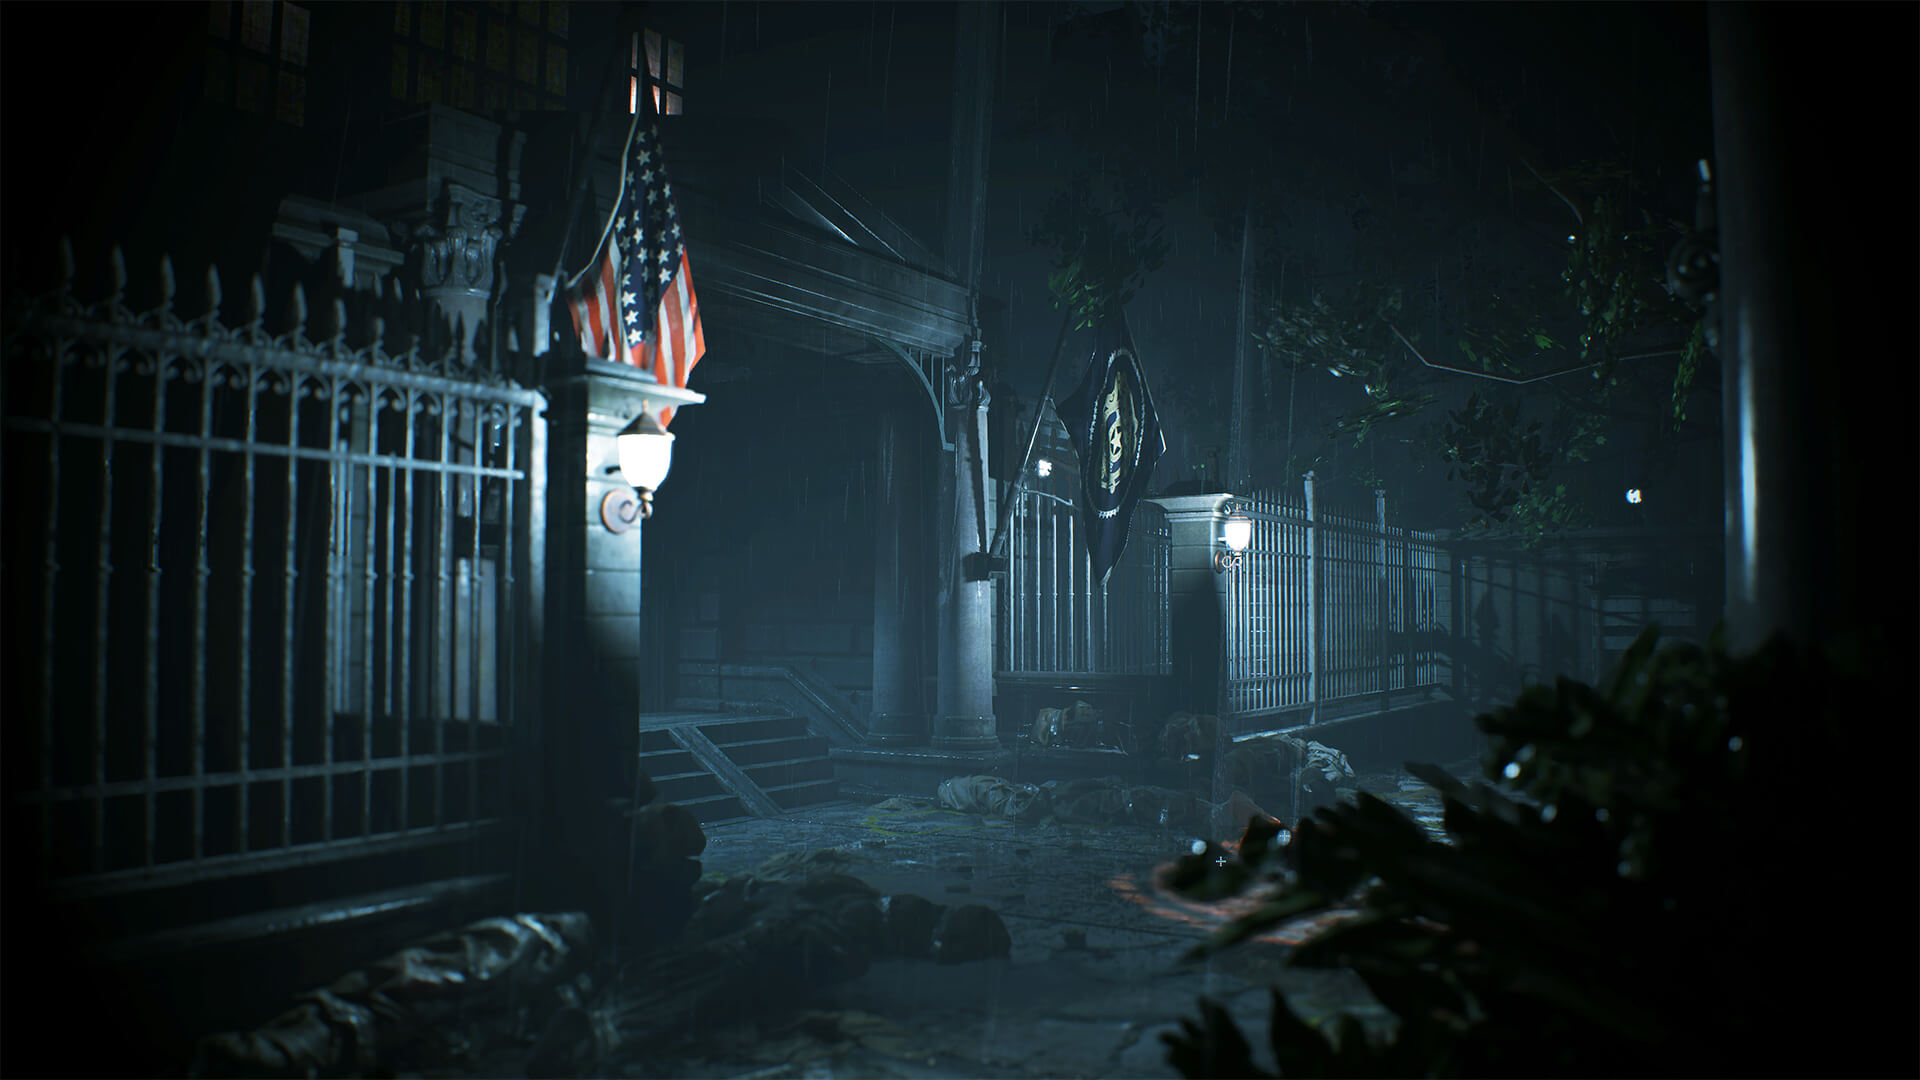 resident-evil-2-player-creates-incredible-looking-first-person-mod